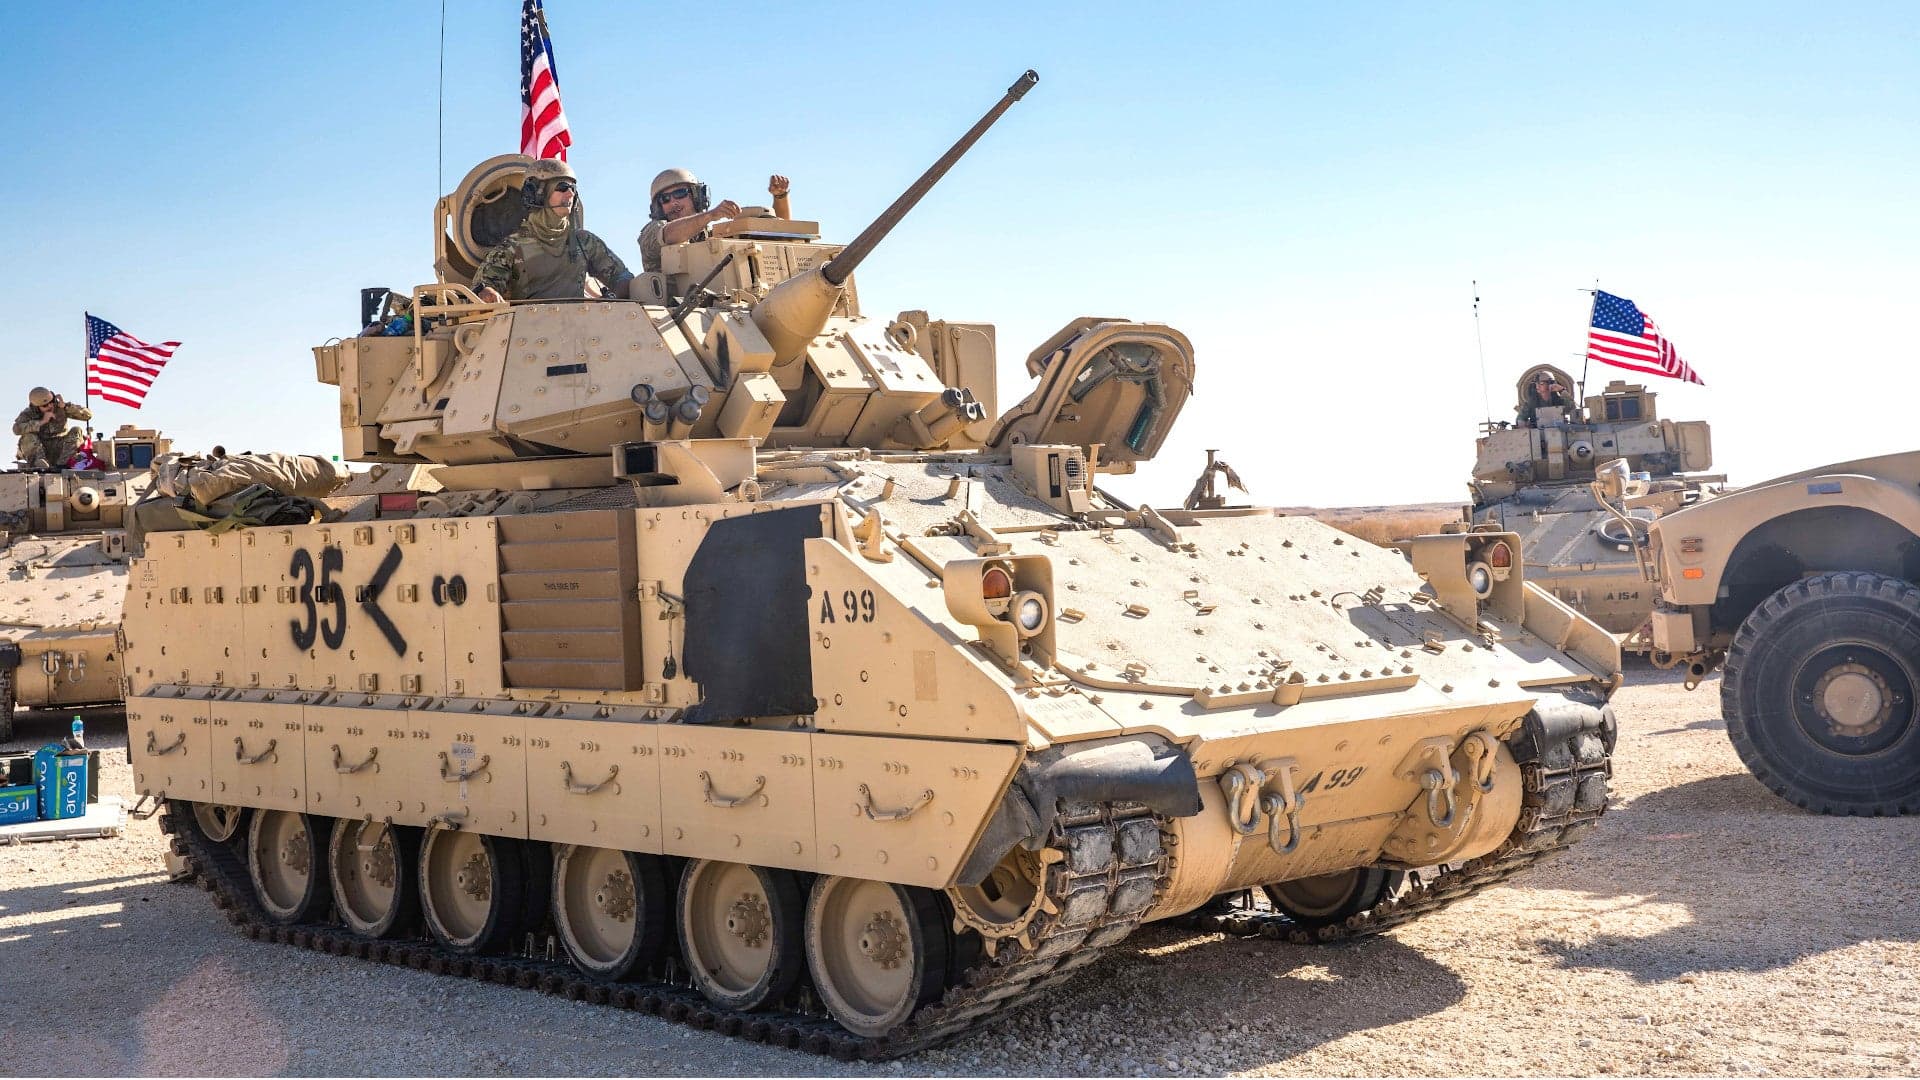 American Bradley Armored Vehicles Were Pulled Out of Syria After Less Than Two Months